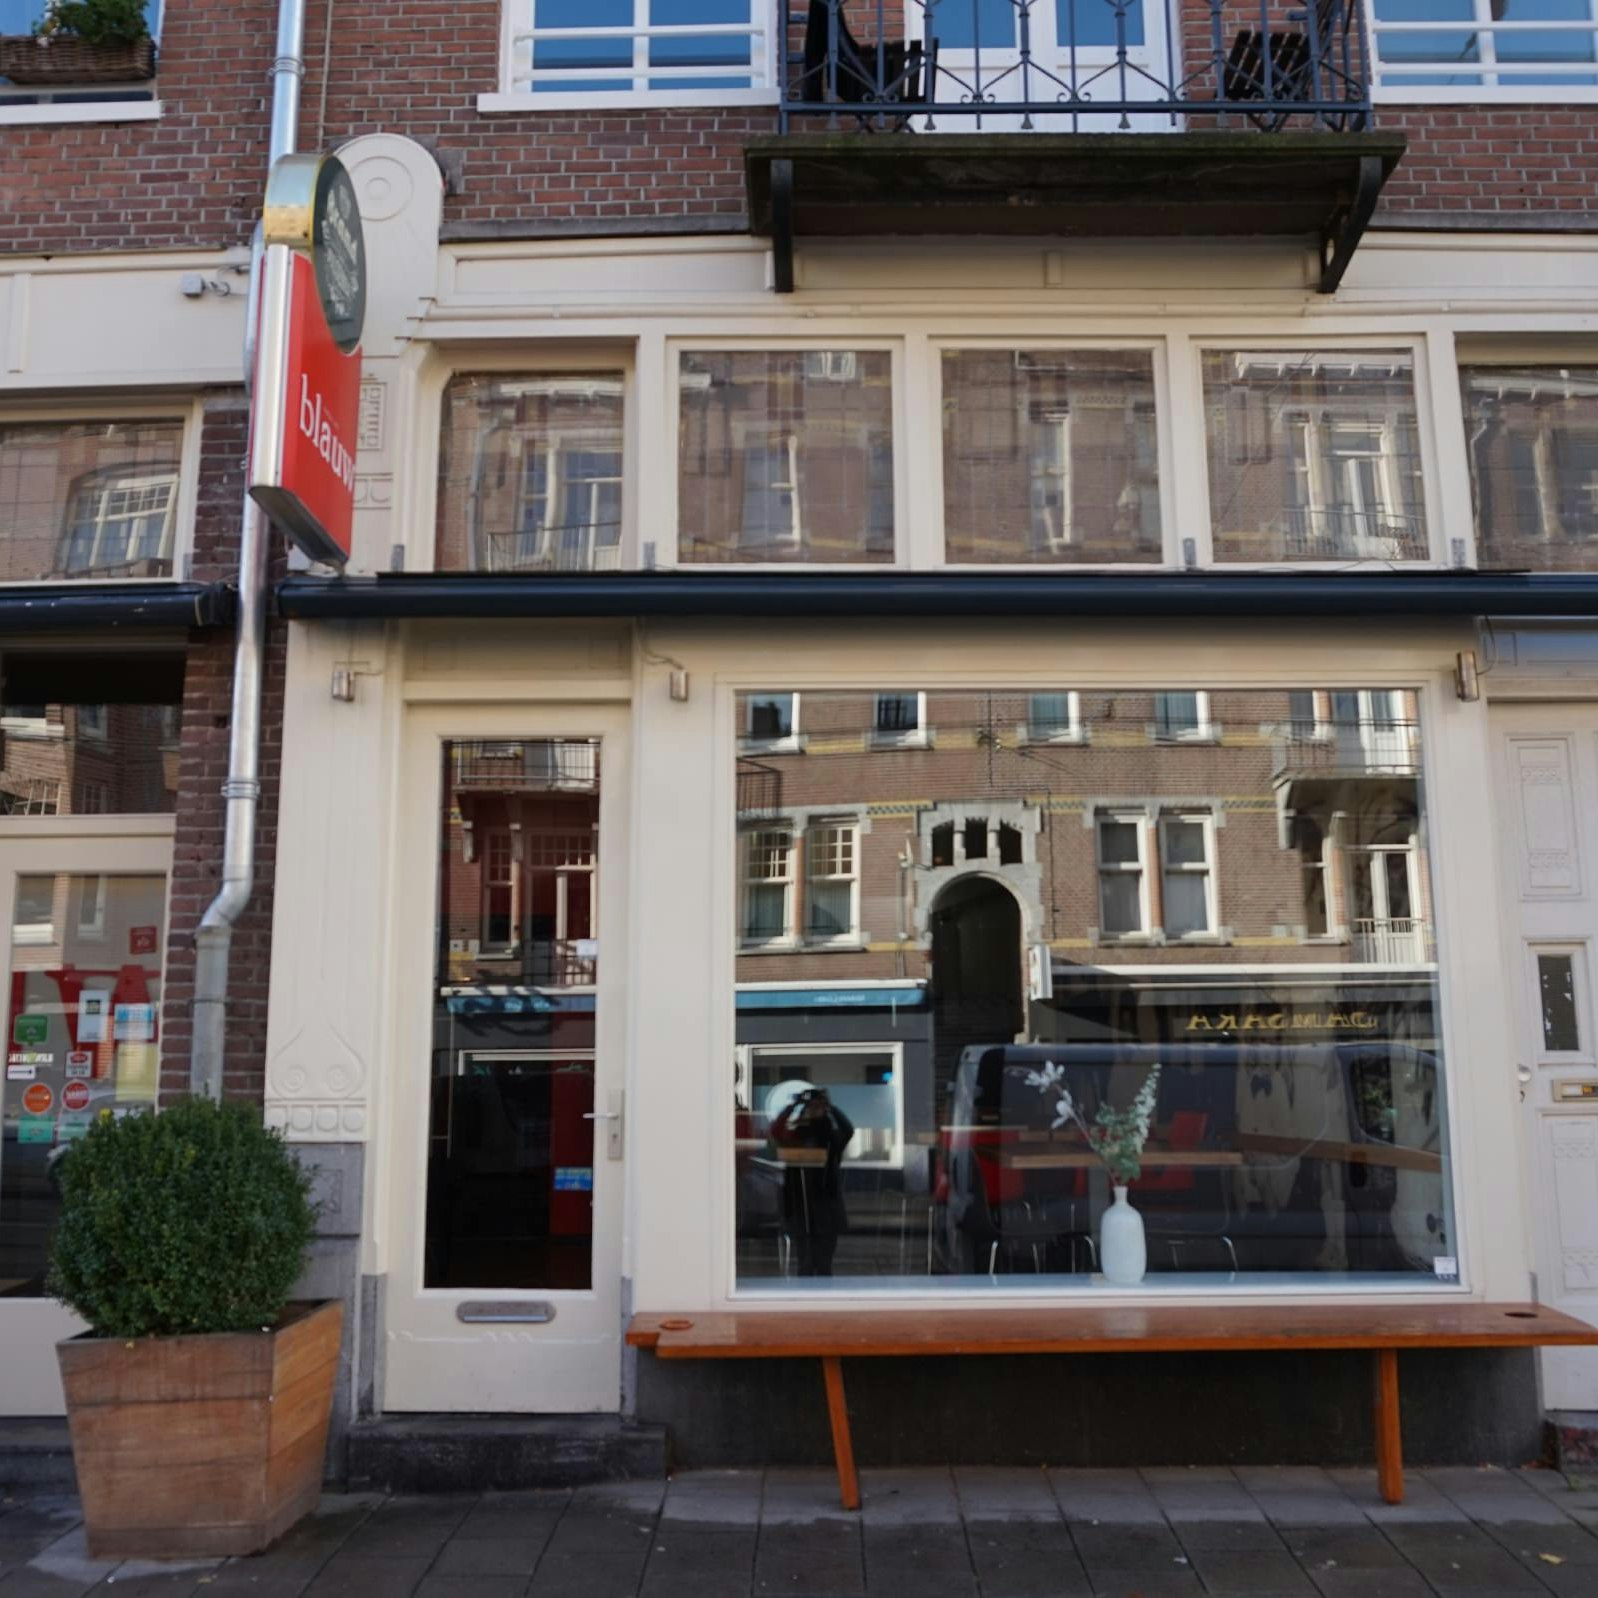 Top-notch Indonesian cuisine is the order of the day Blauw restaurant, Amsterdam